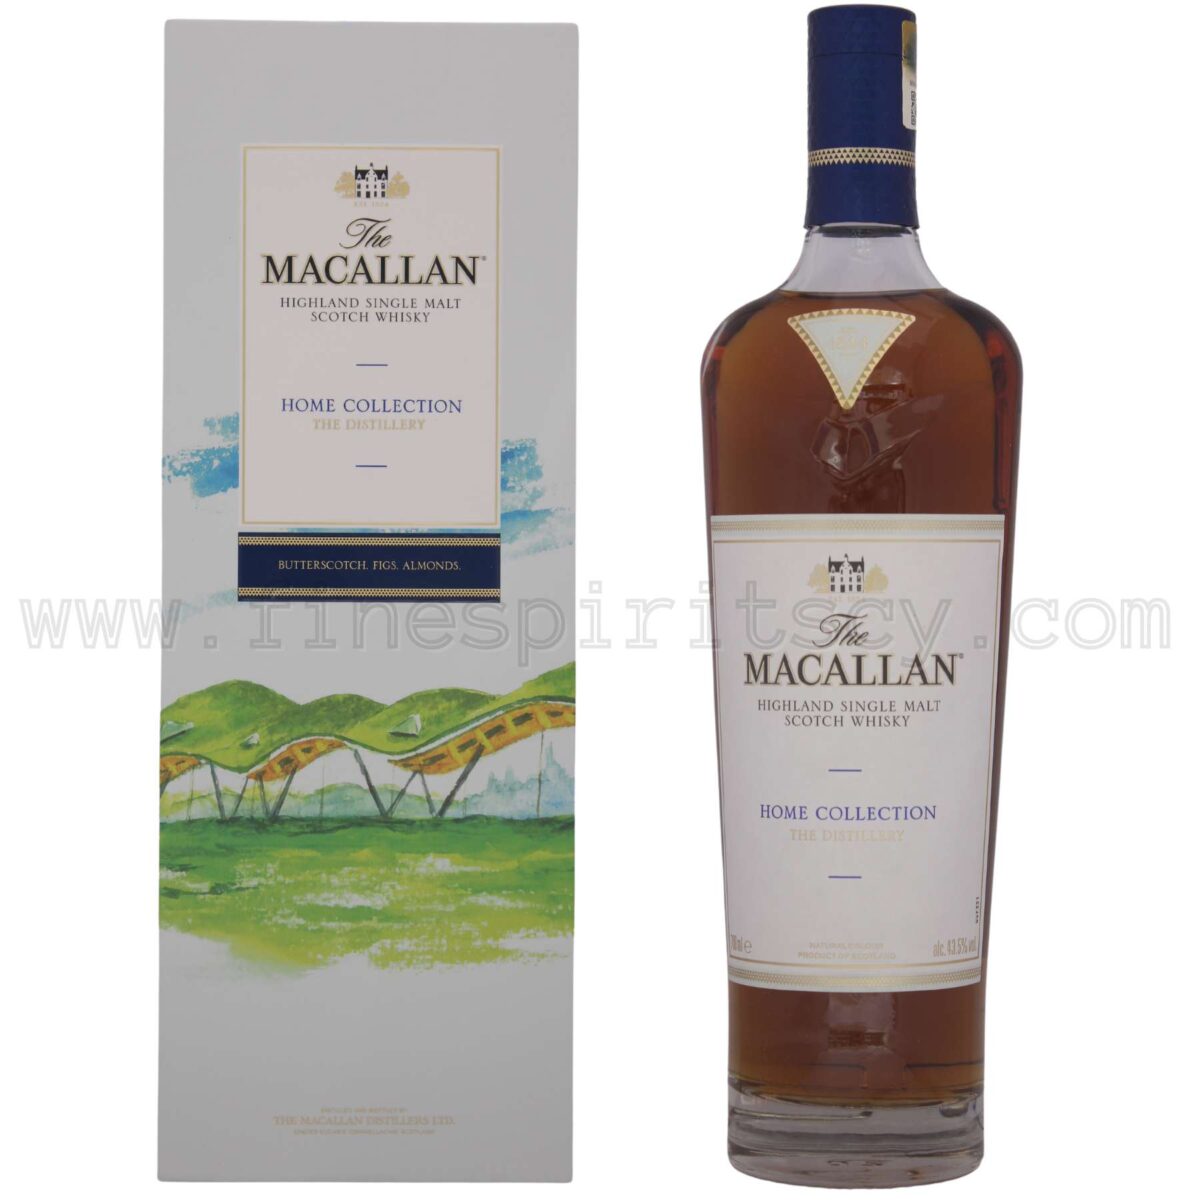 Macallan Home Collection The Distillery Price Order Online Price CY Buy Shop